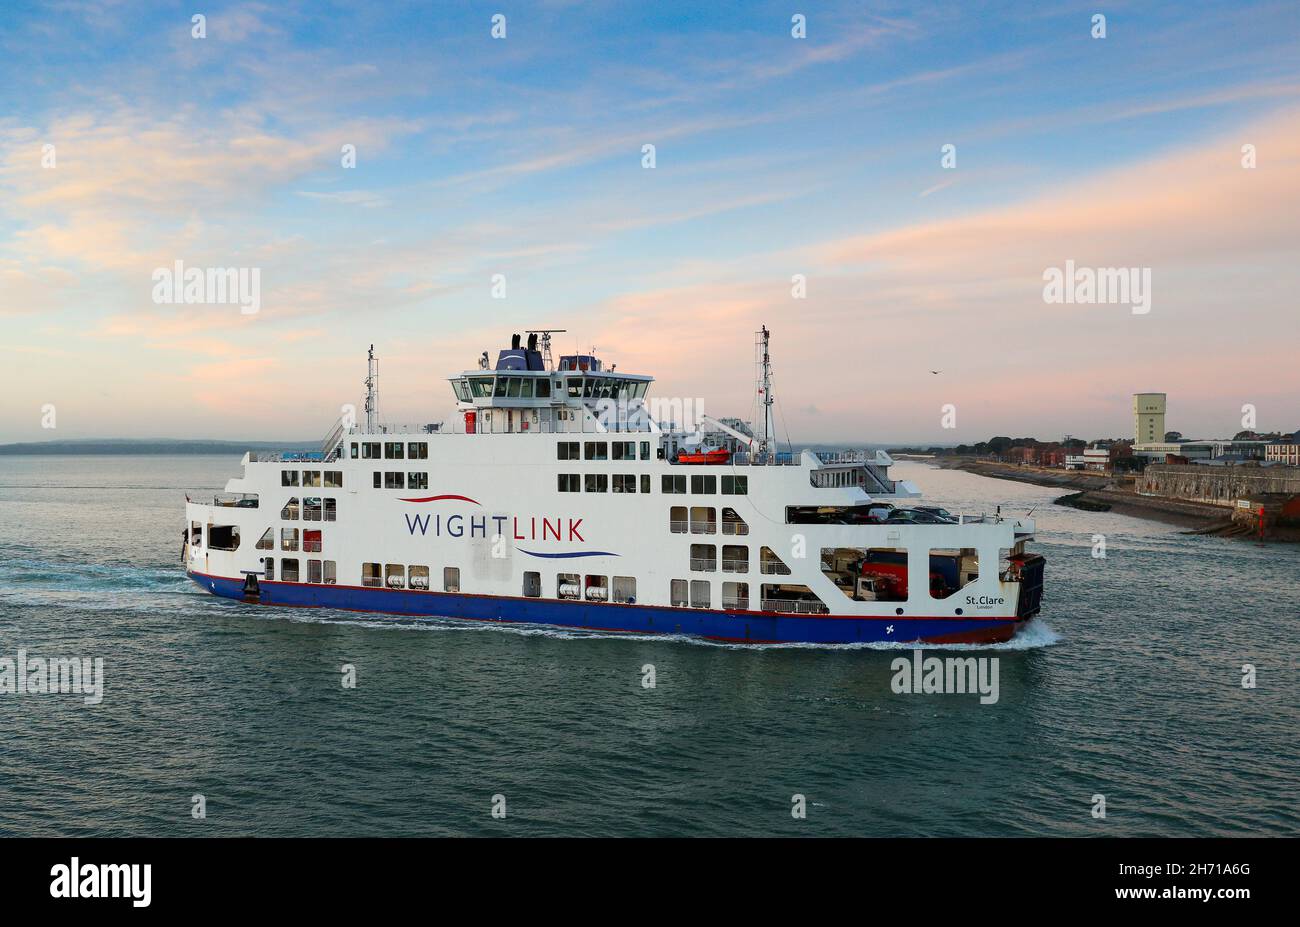 Wight Link Portsmouth to Isle of Wight Ferry St. Claire pictured sailing form Portsmouth at Sunrise Stock Photo